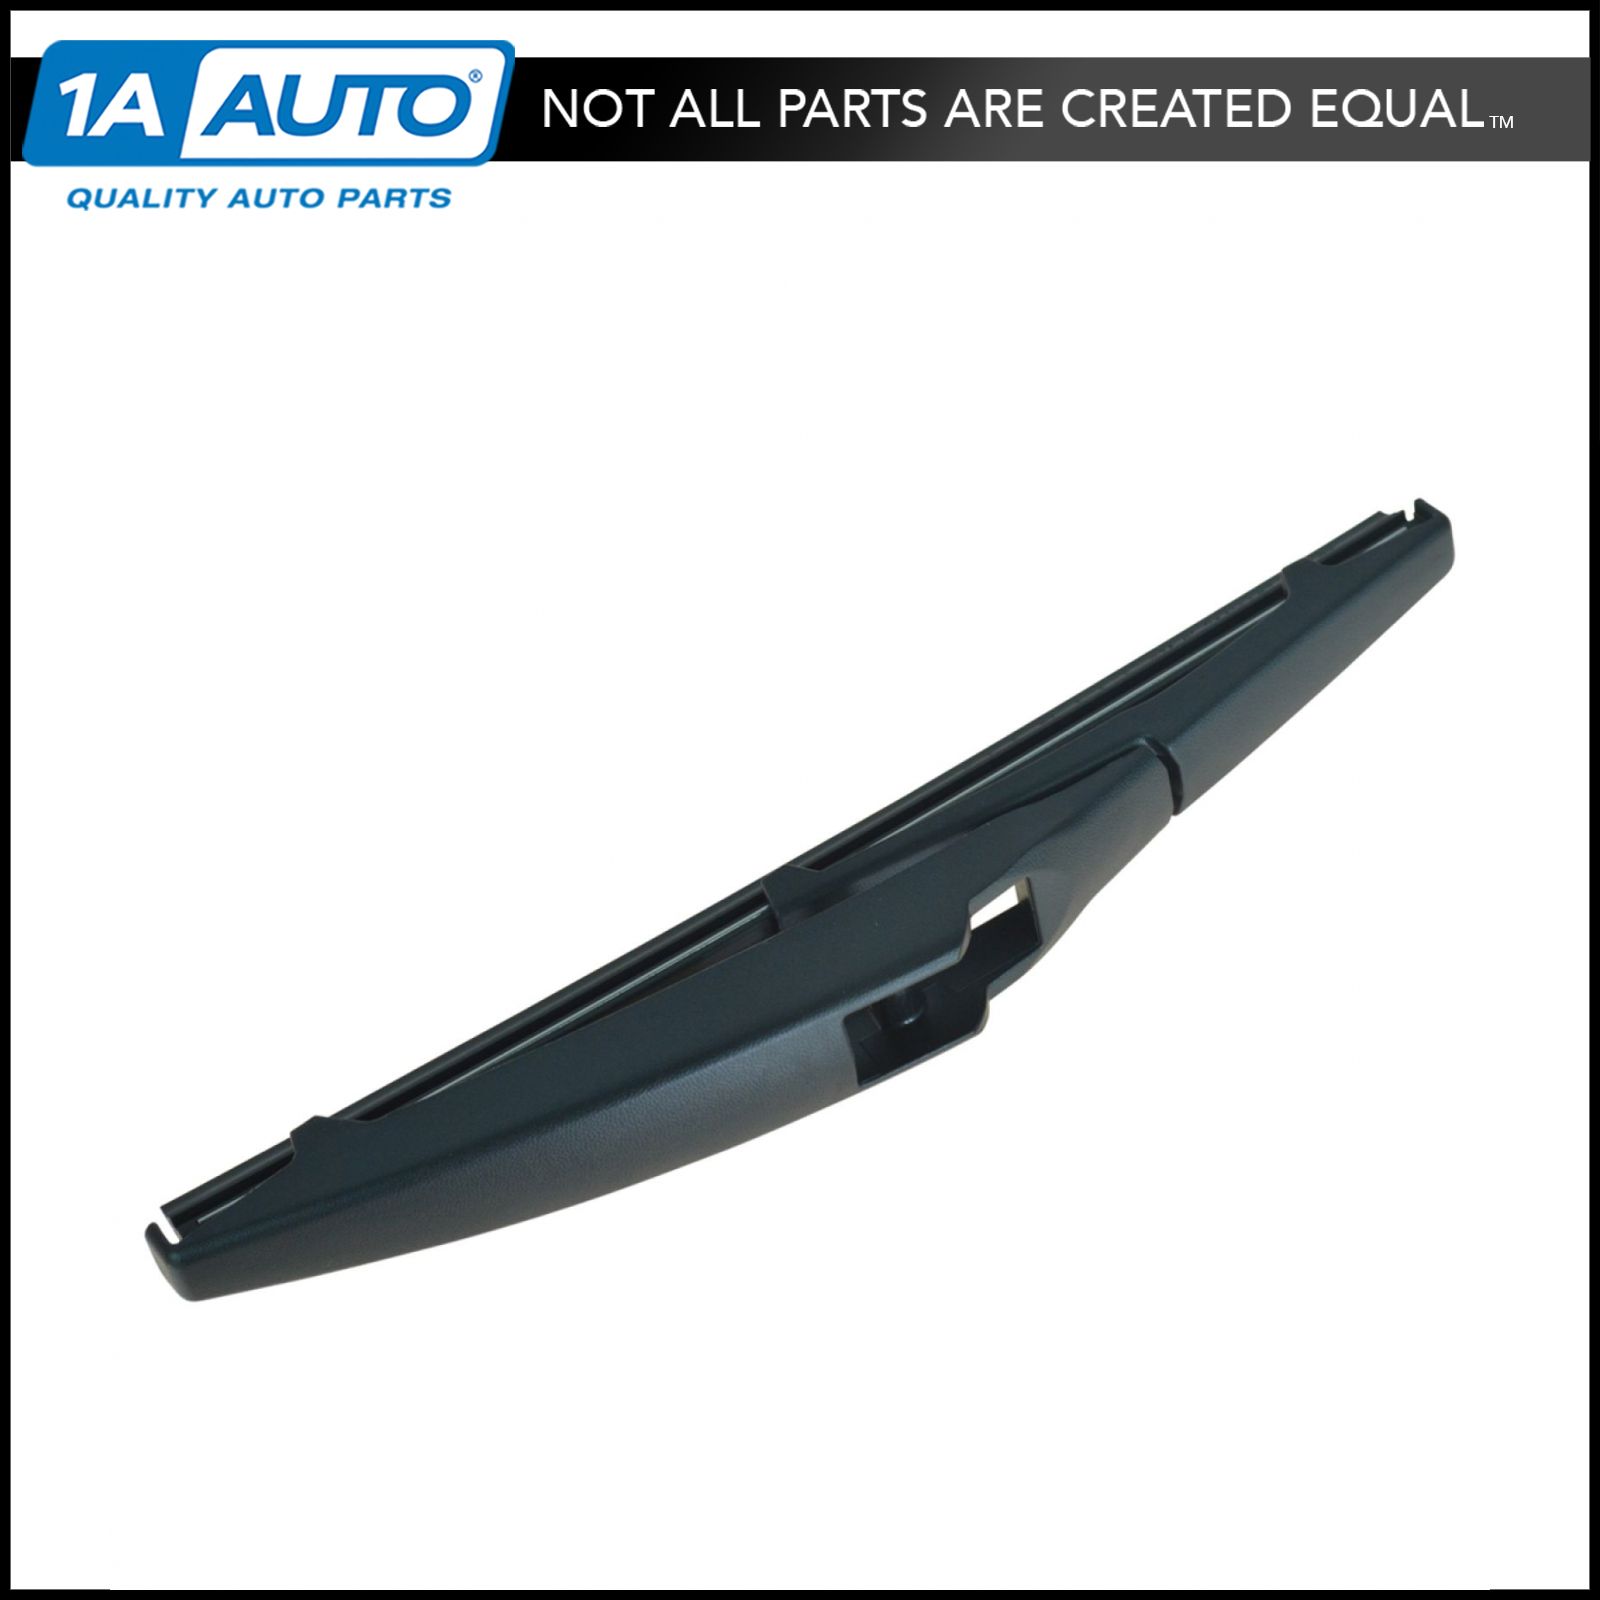 OEM 85242-52060 Rear Wiper Blade Assembly for Lexus CT200h Scion xD New | eBay 2016 Scion Im Rear Wiper Blade Replacement